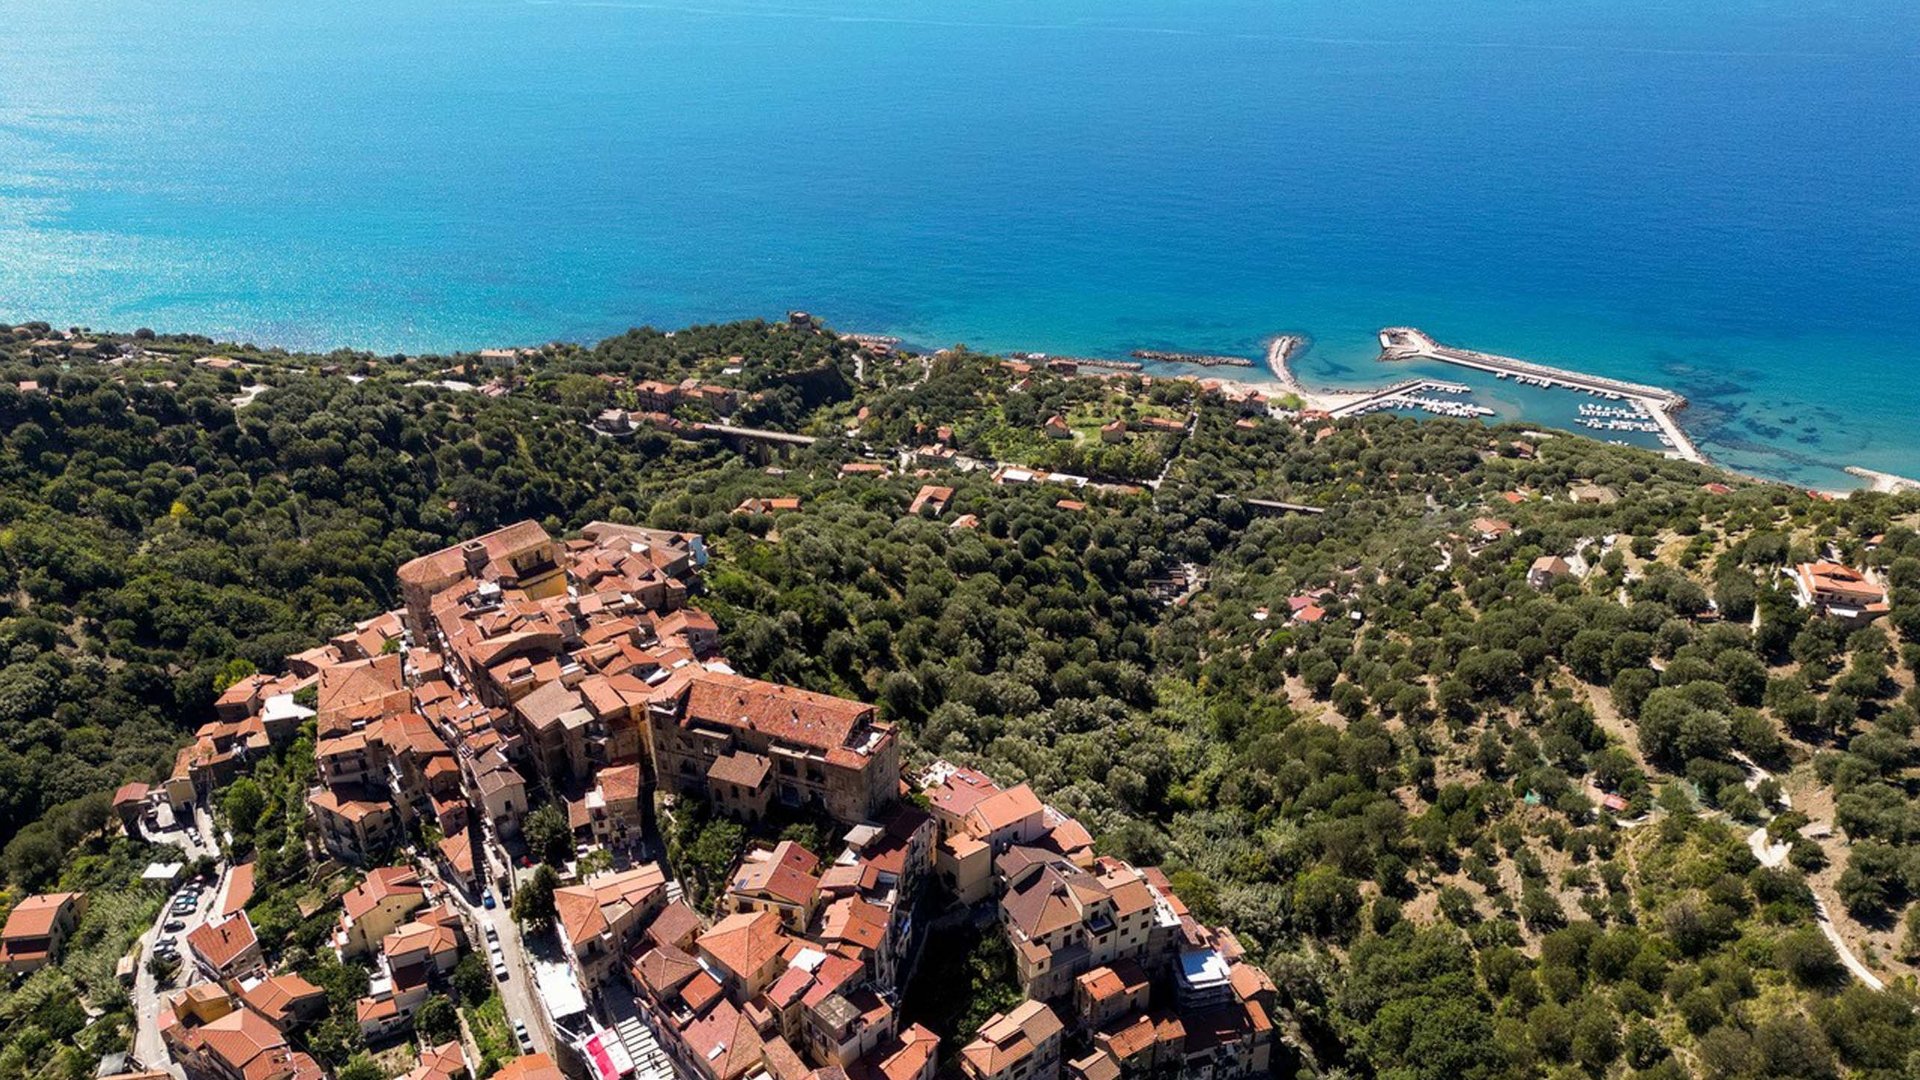 What to visit in Palinuro or the rest of the Cilento region?